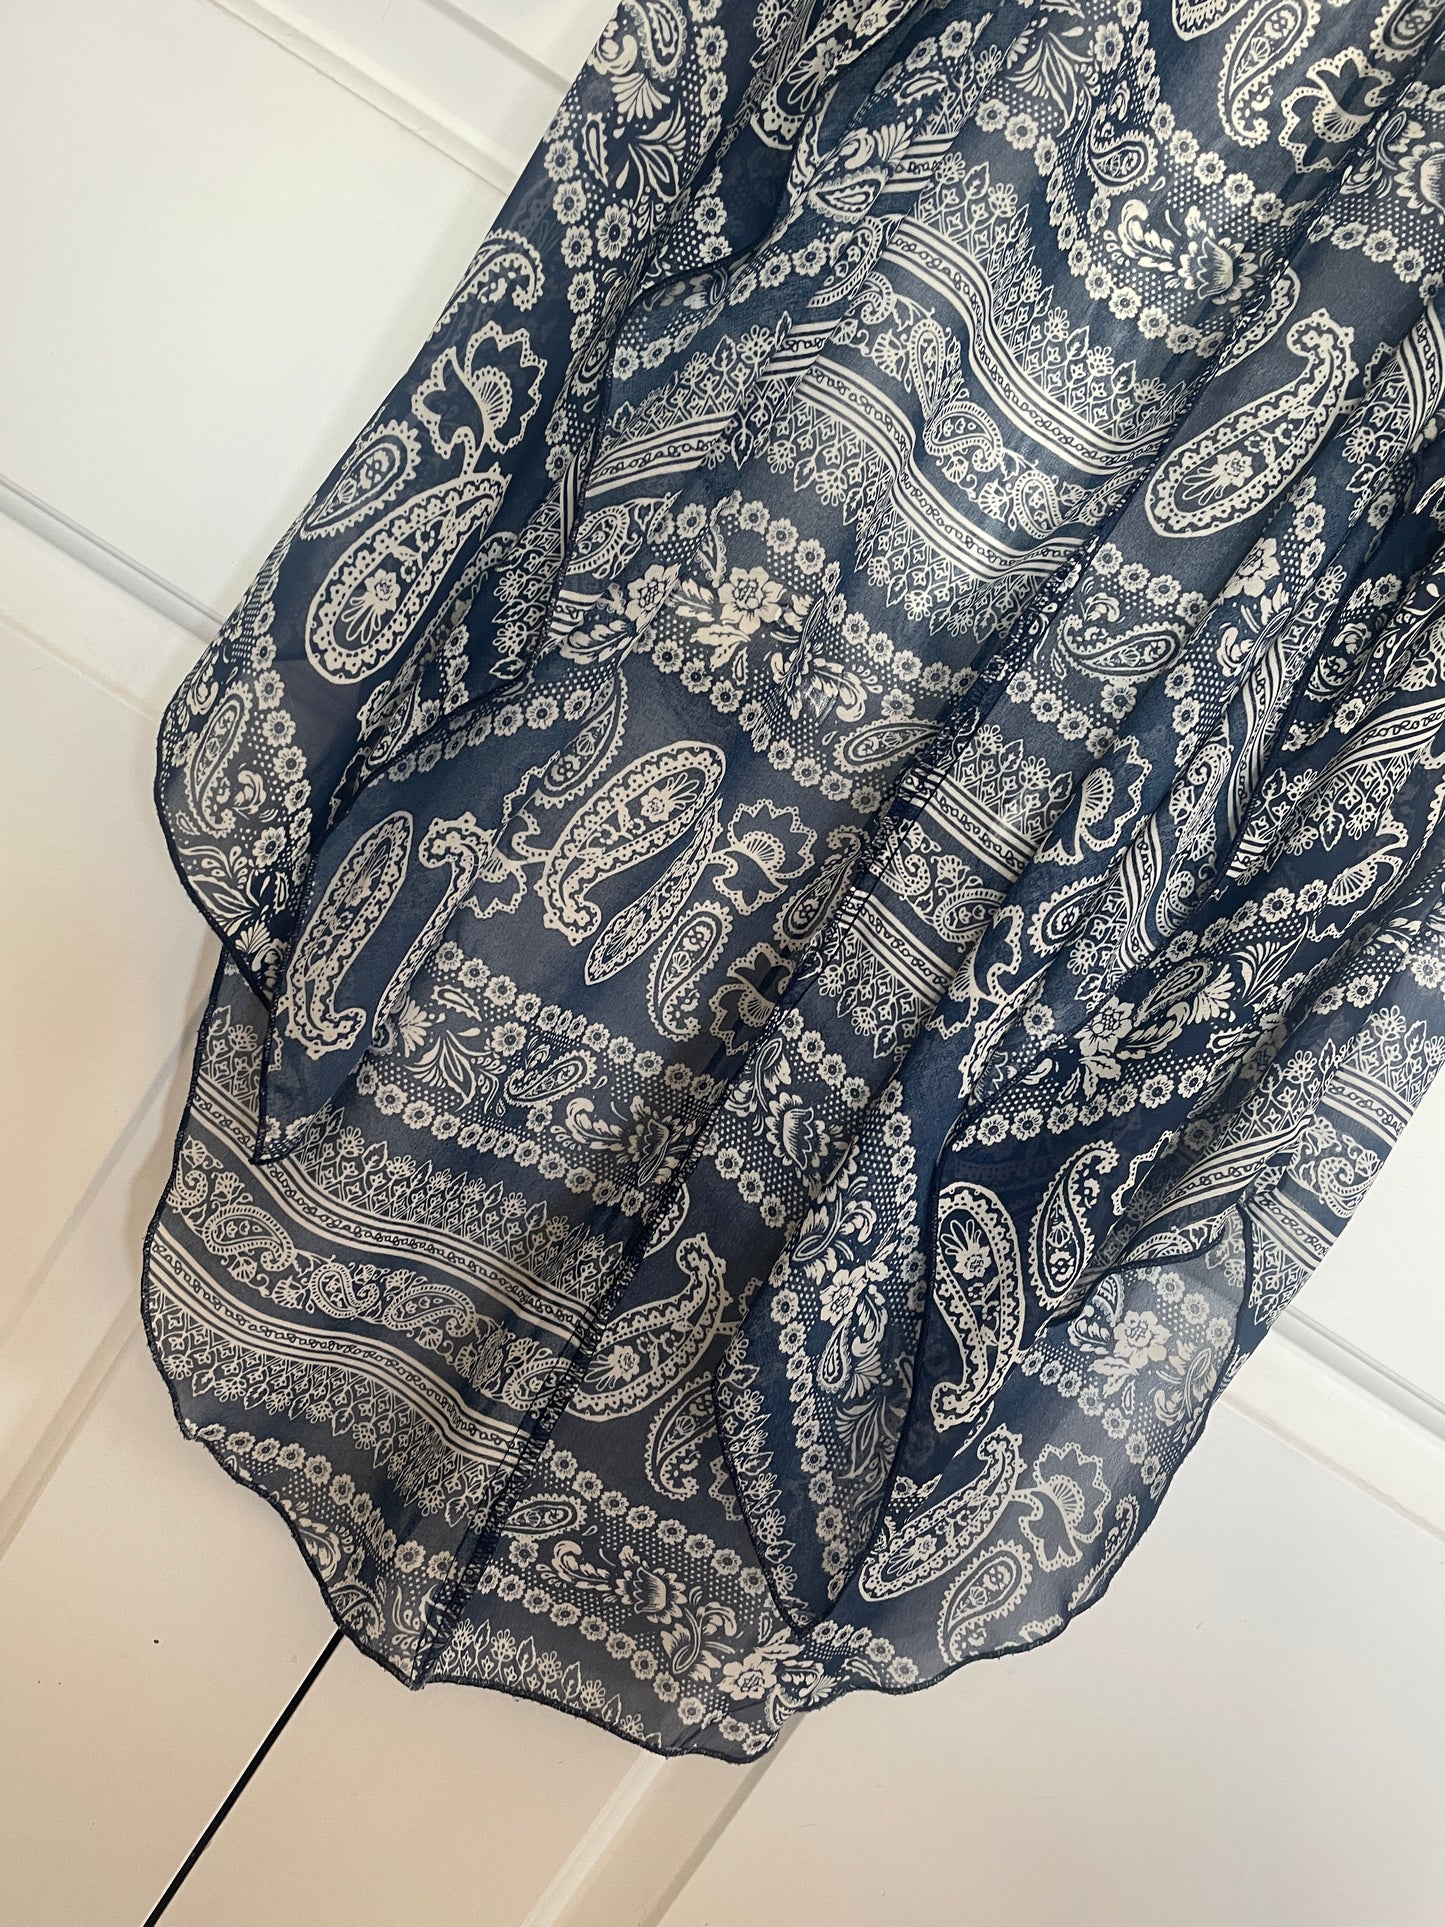 Women’s Small Charlotte Russe Navy Blue and White Paisley Sheer Kimono Duster